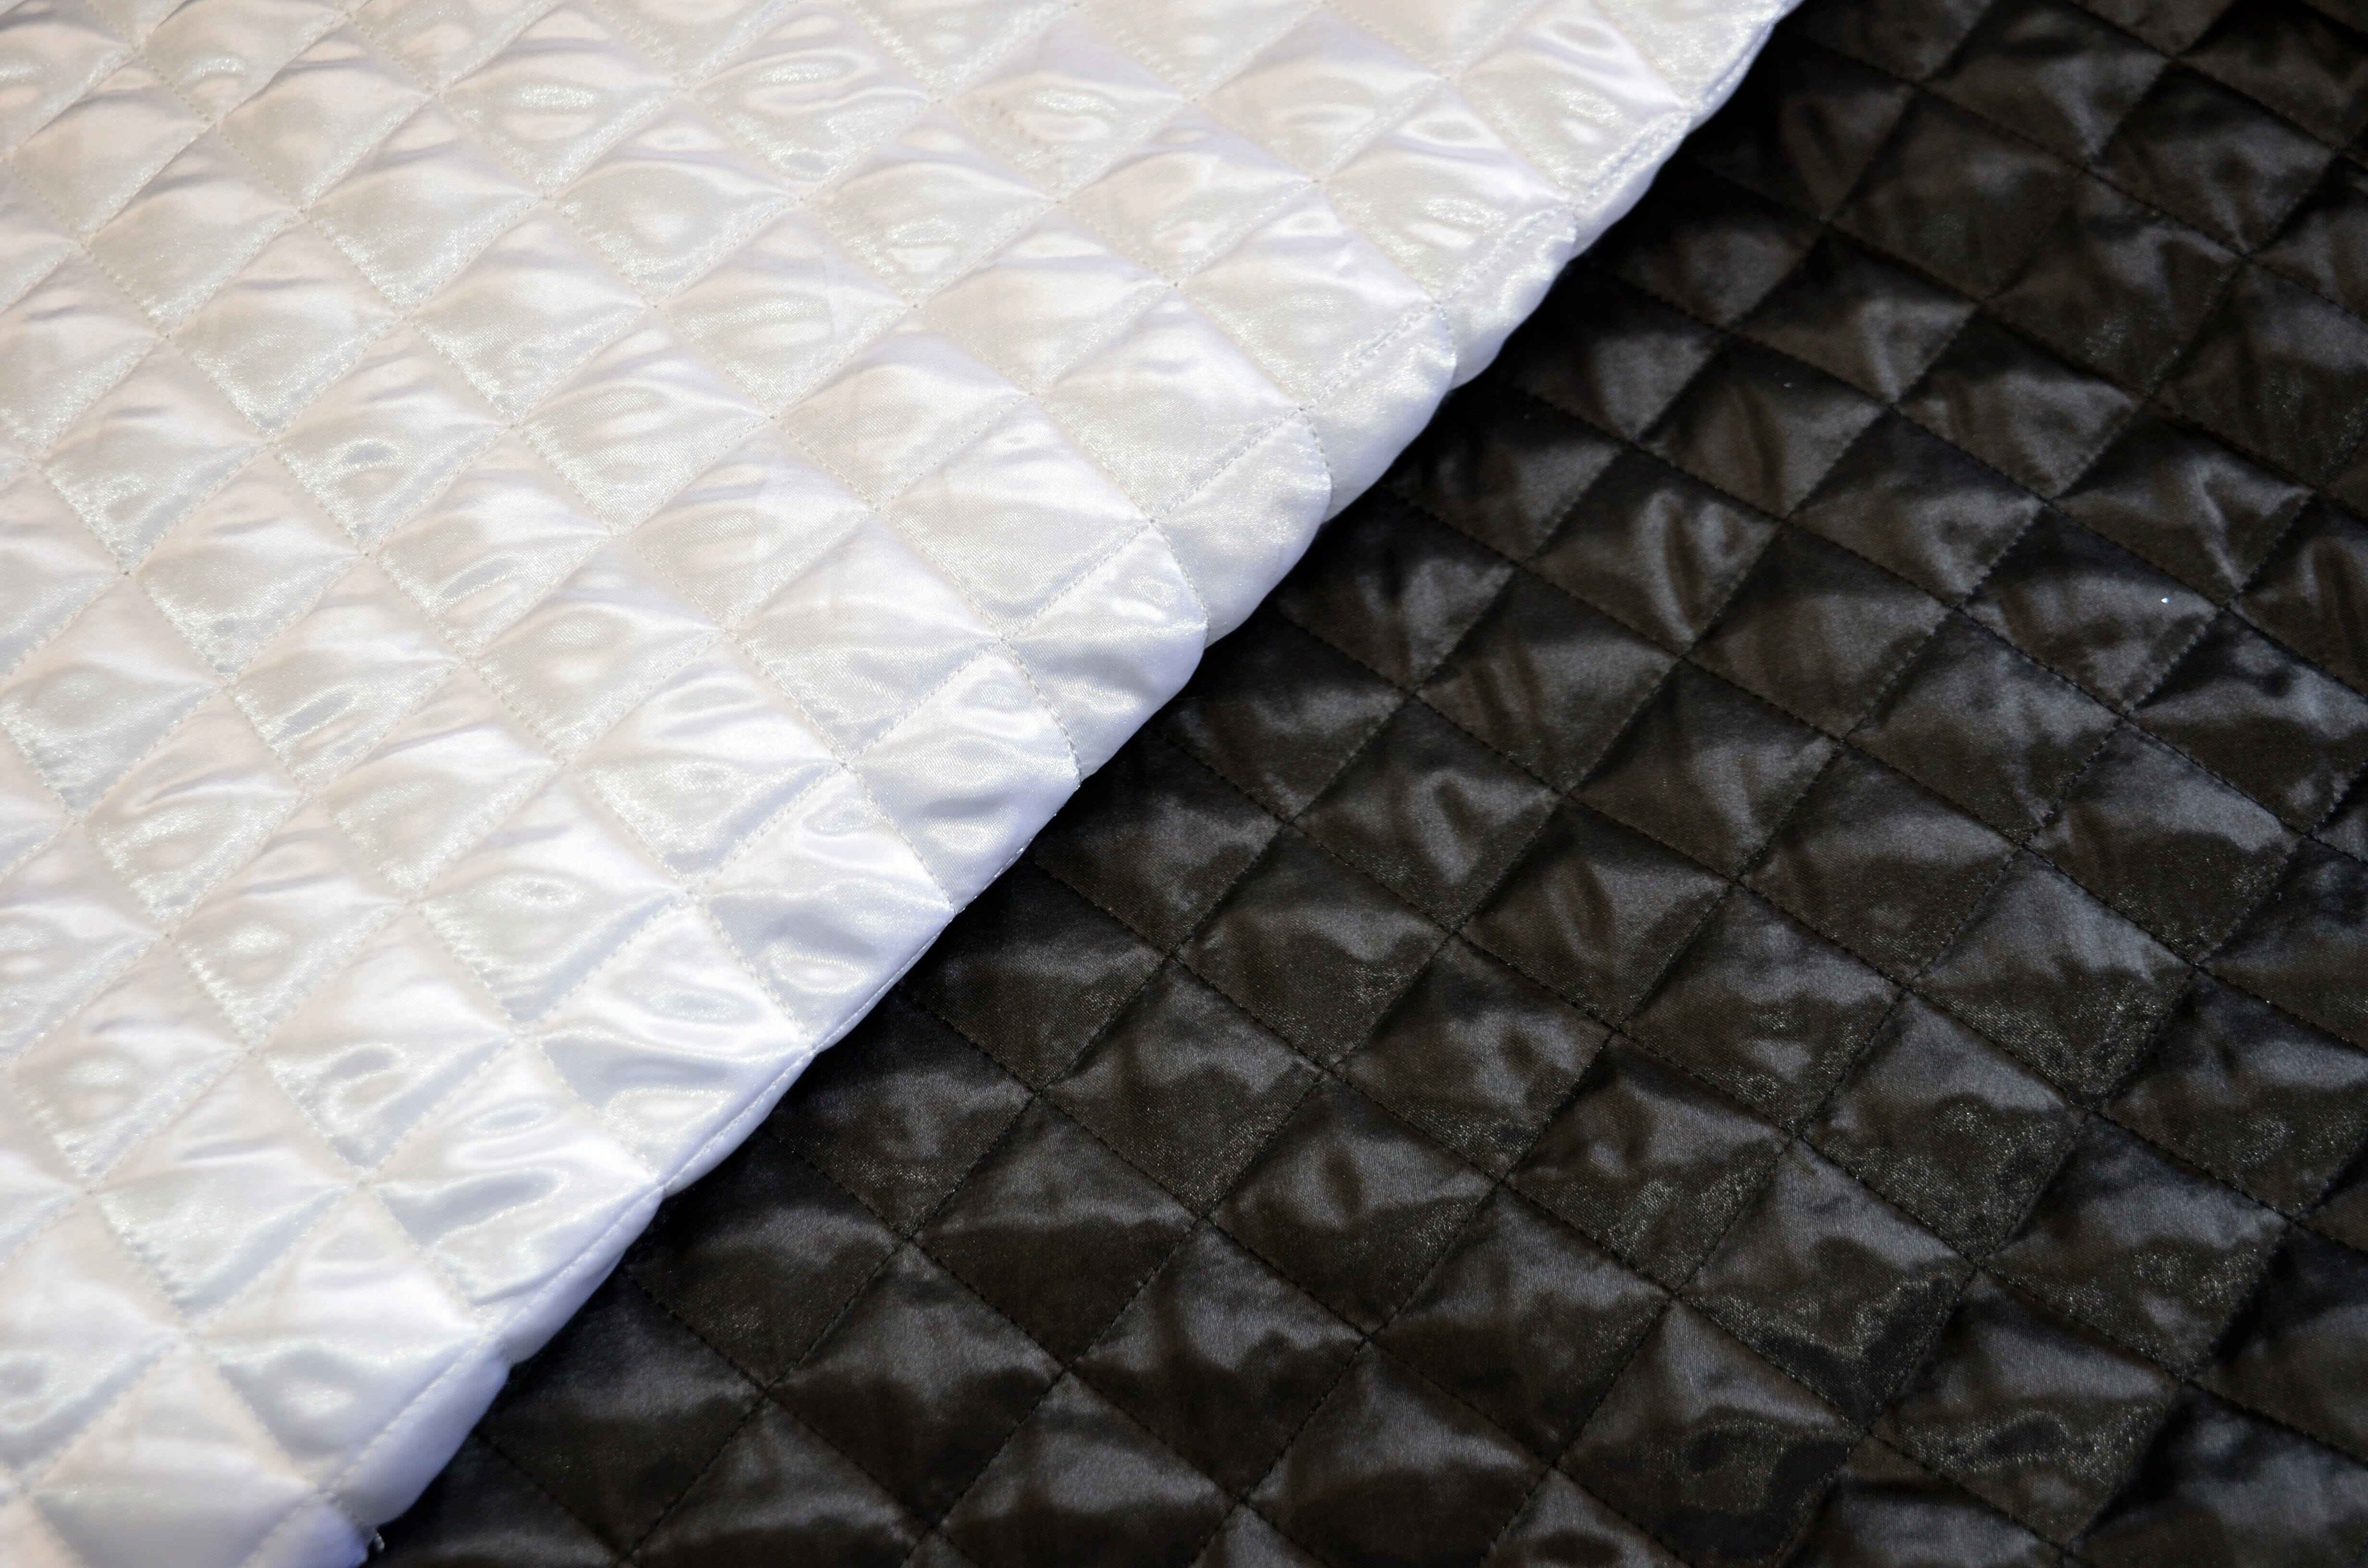 Teal Diamond Double Faced Quilted Fabric